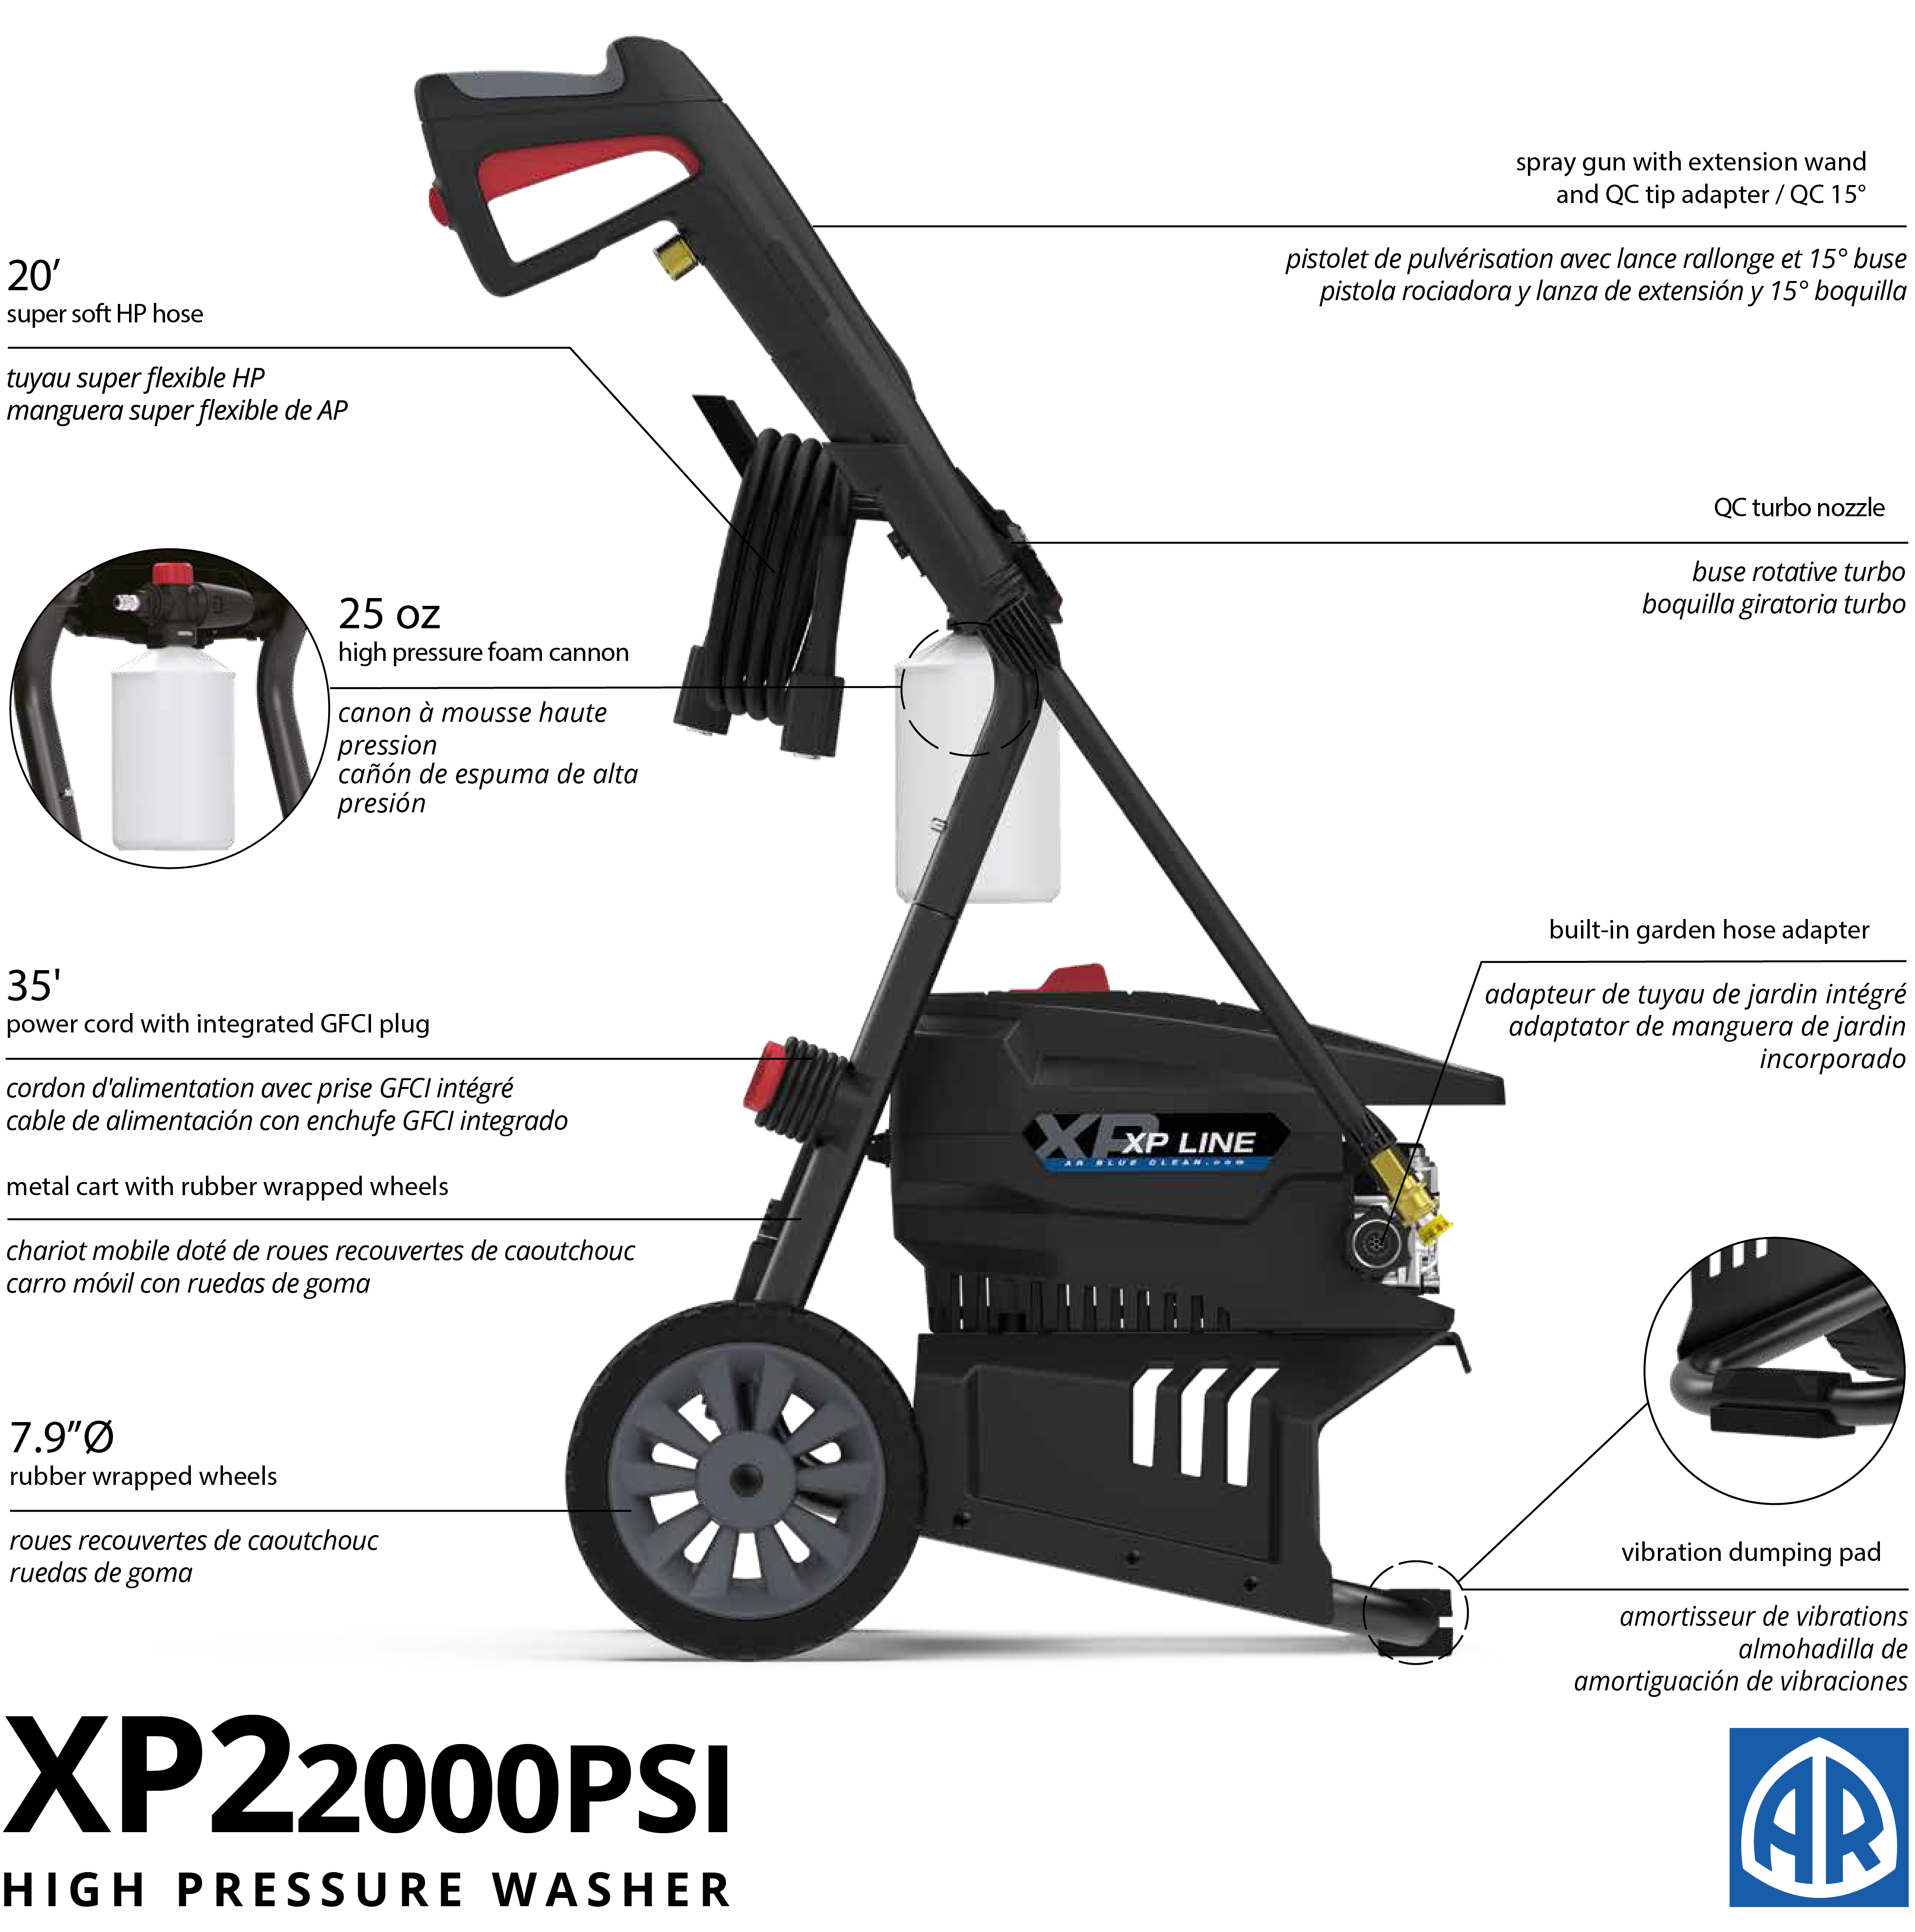 AB Blue Clean XP22000 Product Image_Features